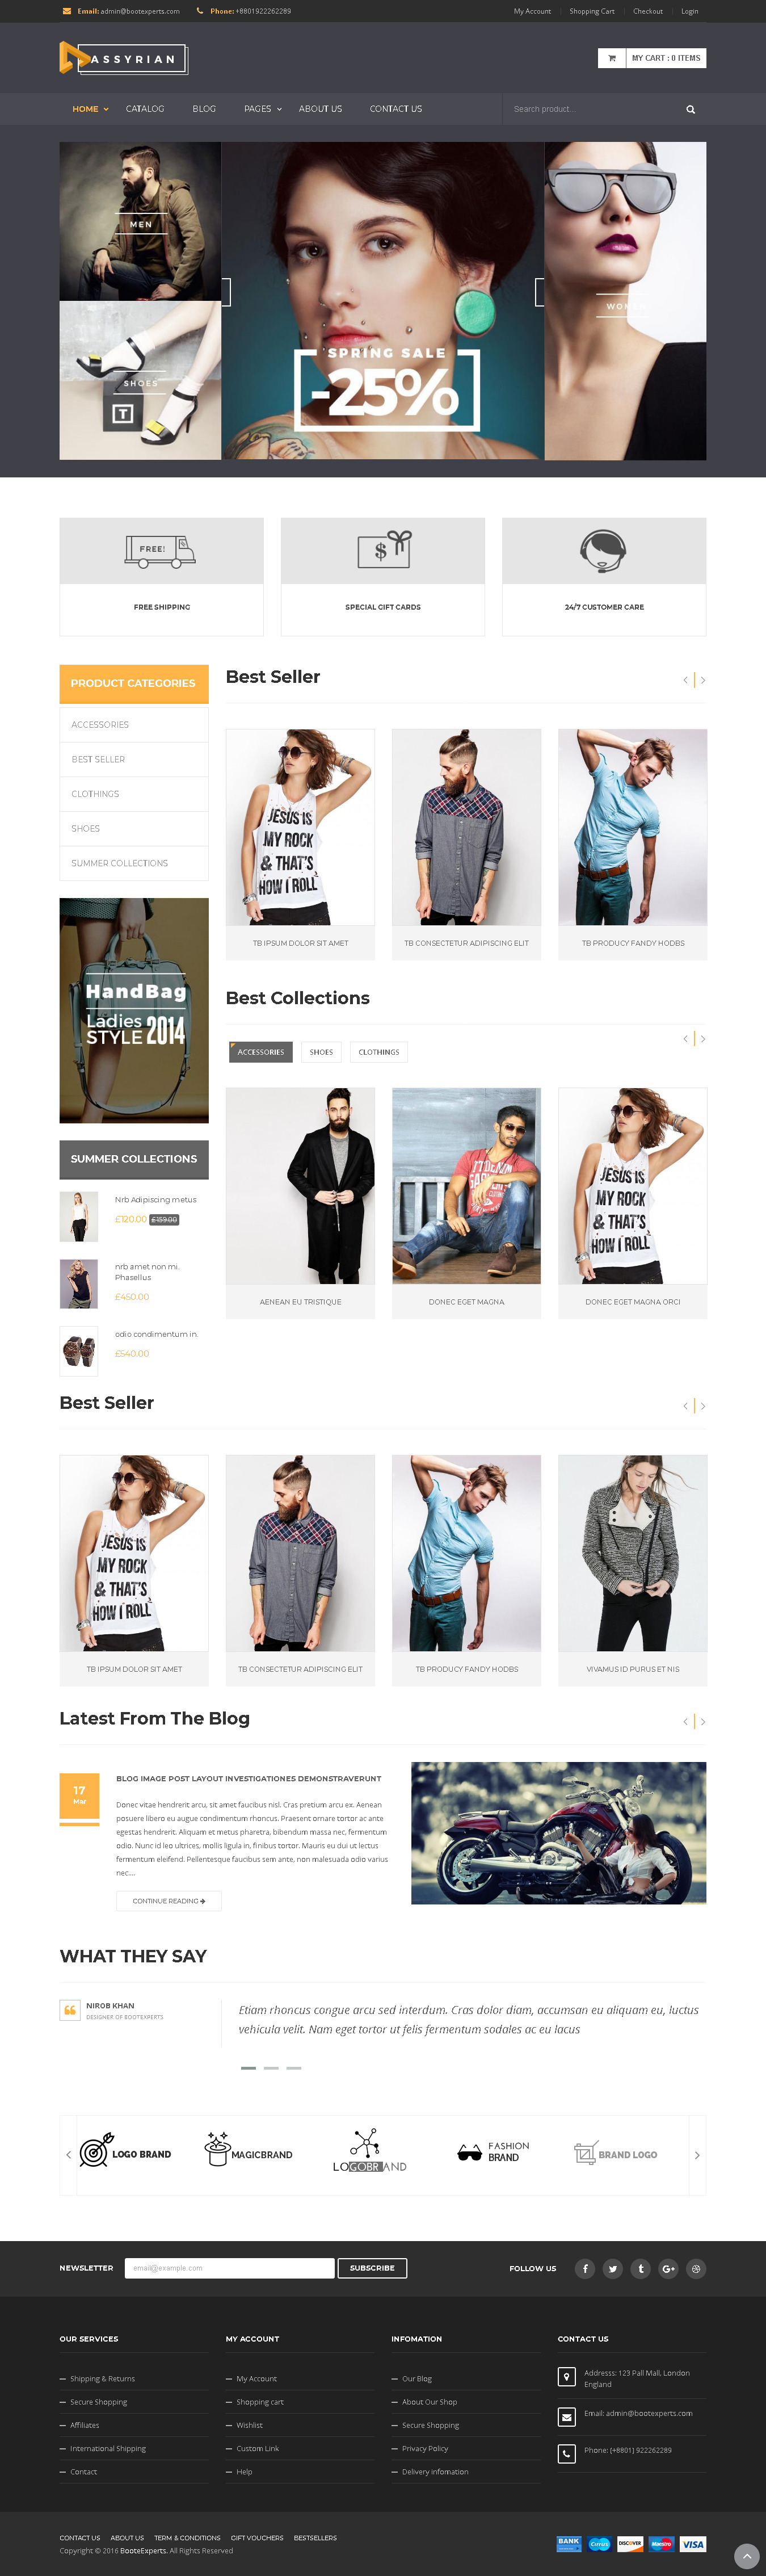 Top Shopify Theme For Large Inventory Fashion Store - Assyrian - Responsive Fashion Shopify Theme